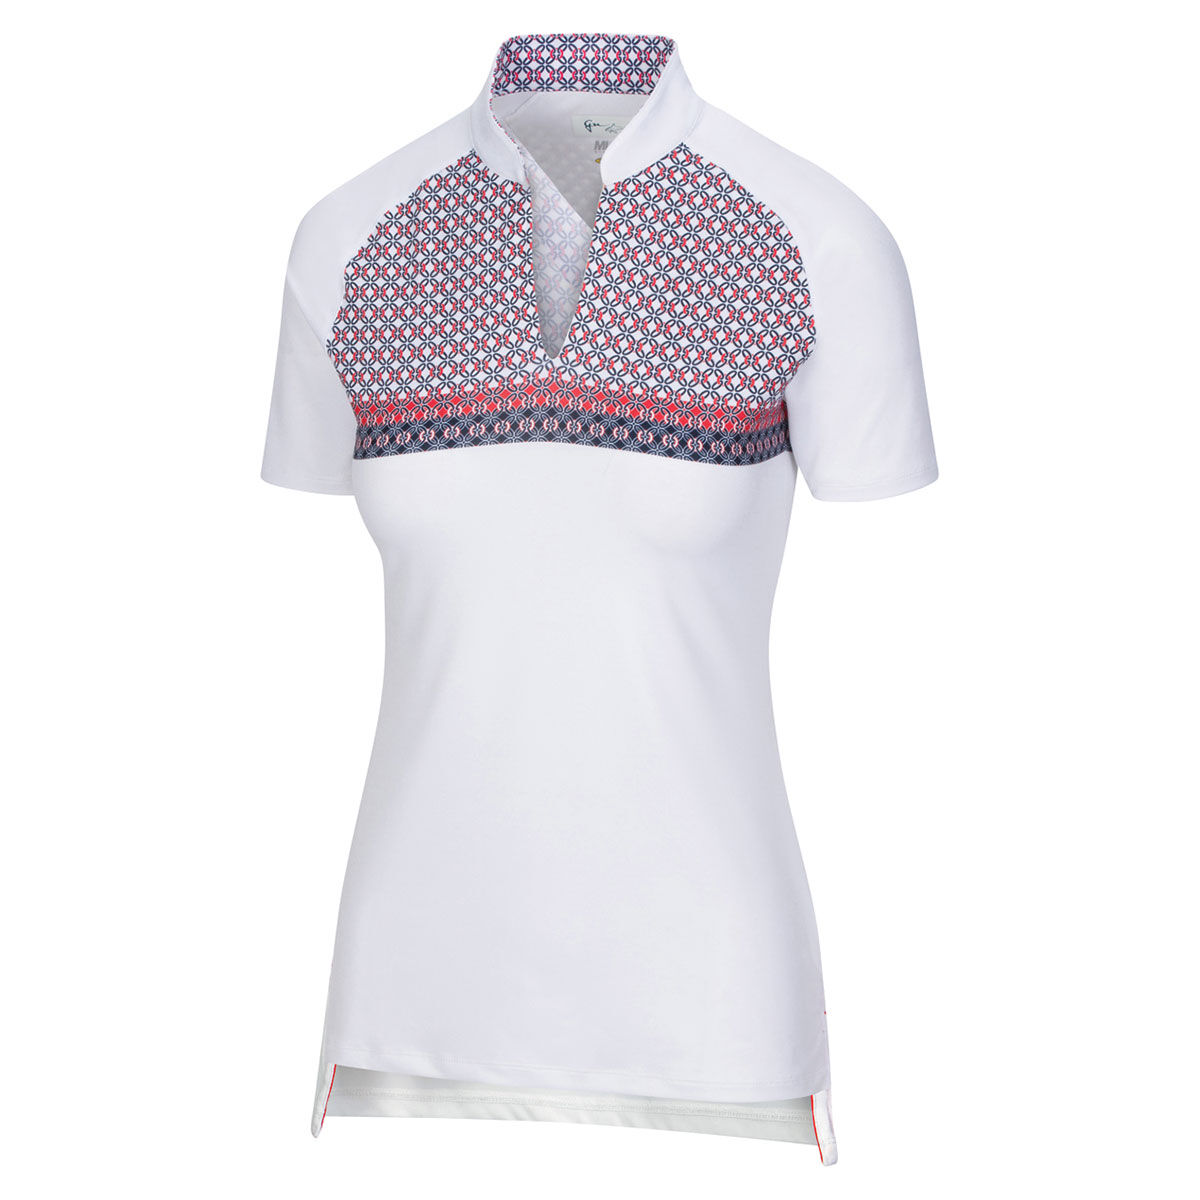 Ladies Golf Shoes & Clothing | Women's Golf Clothing & Shoes 